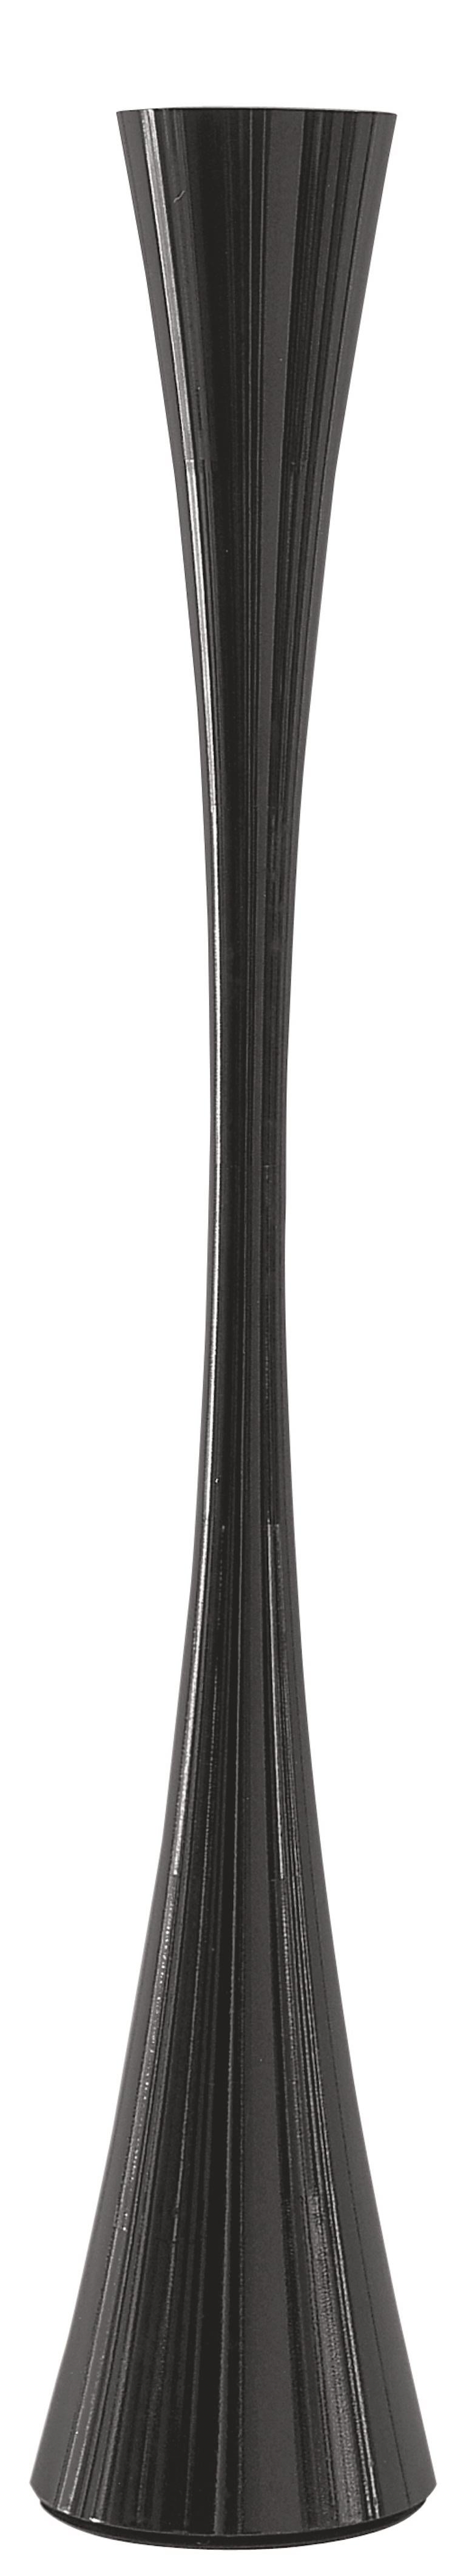 For Sale: Black Martinelli Luce Biconica POL 2217 Floor Lamp by Emiliana Martinelli